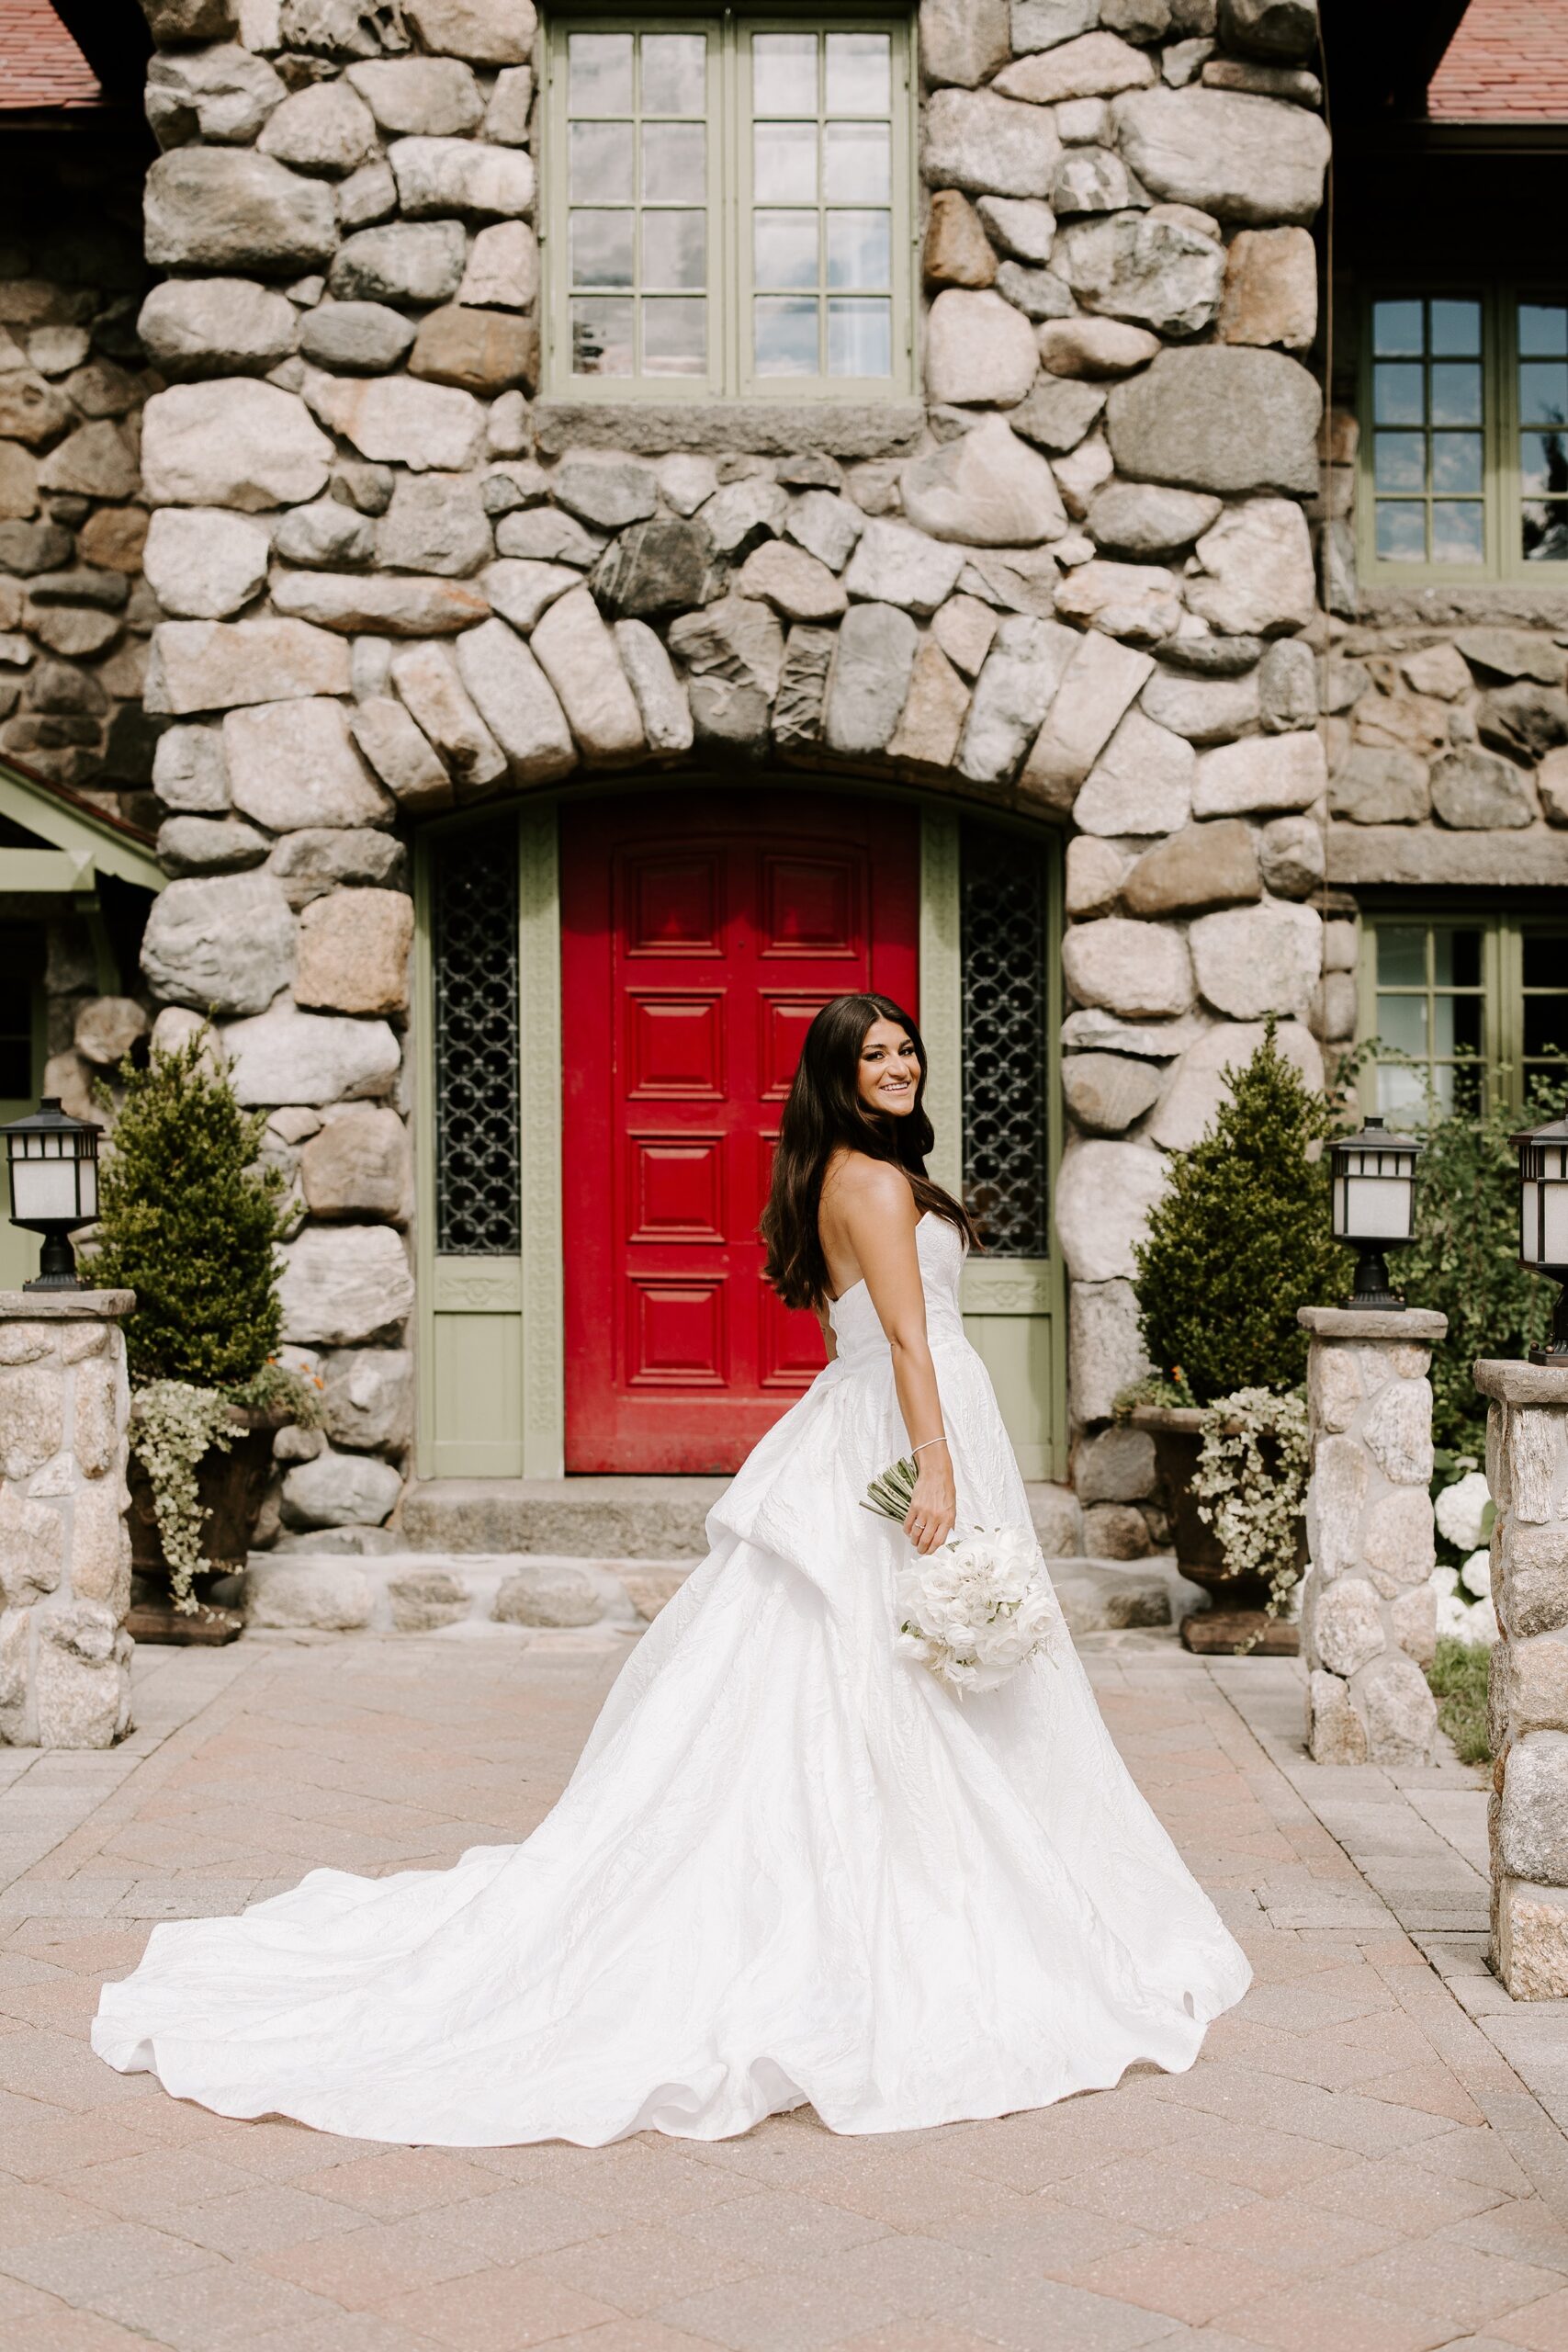 Bridal portraits at Willowdale Estate